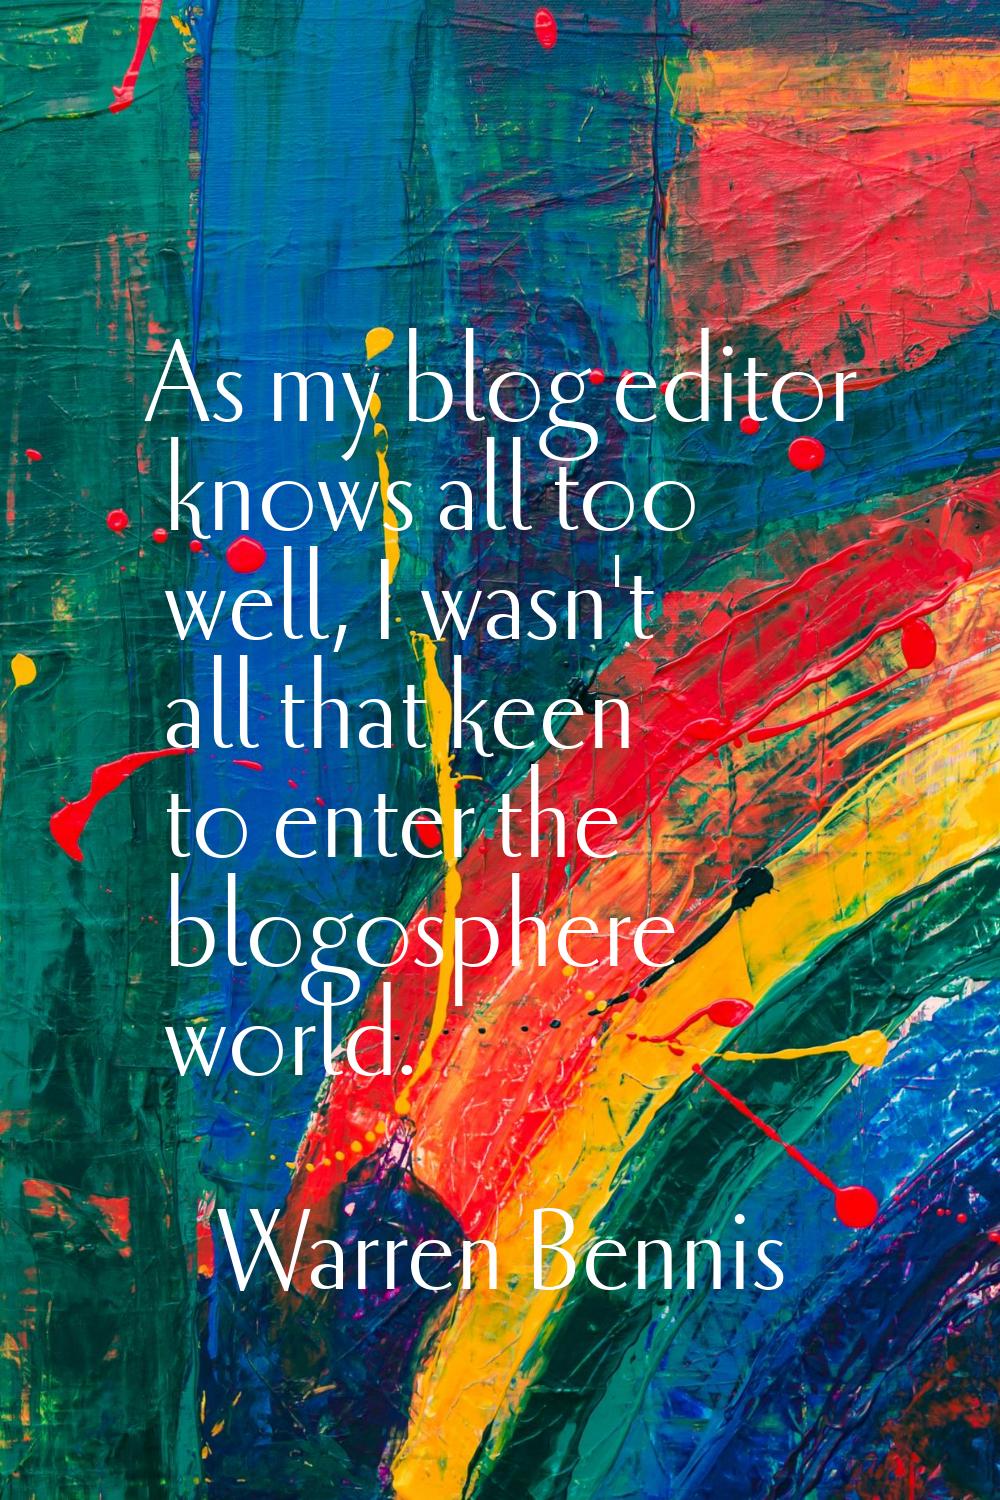 As my blog editor knows all too well, I wasn't all that keen to enter the blogosphere world.